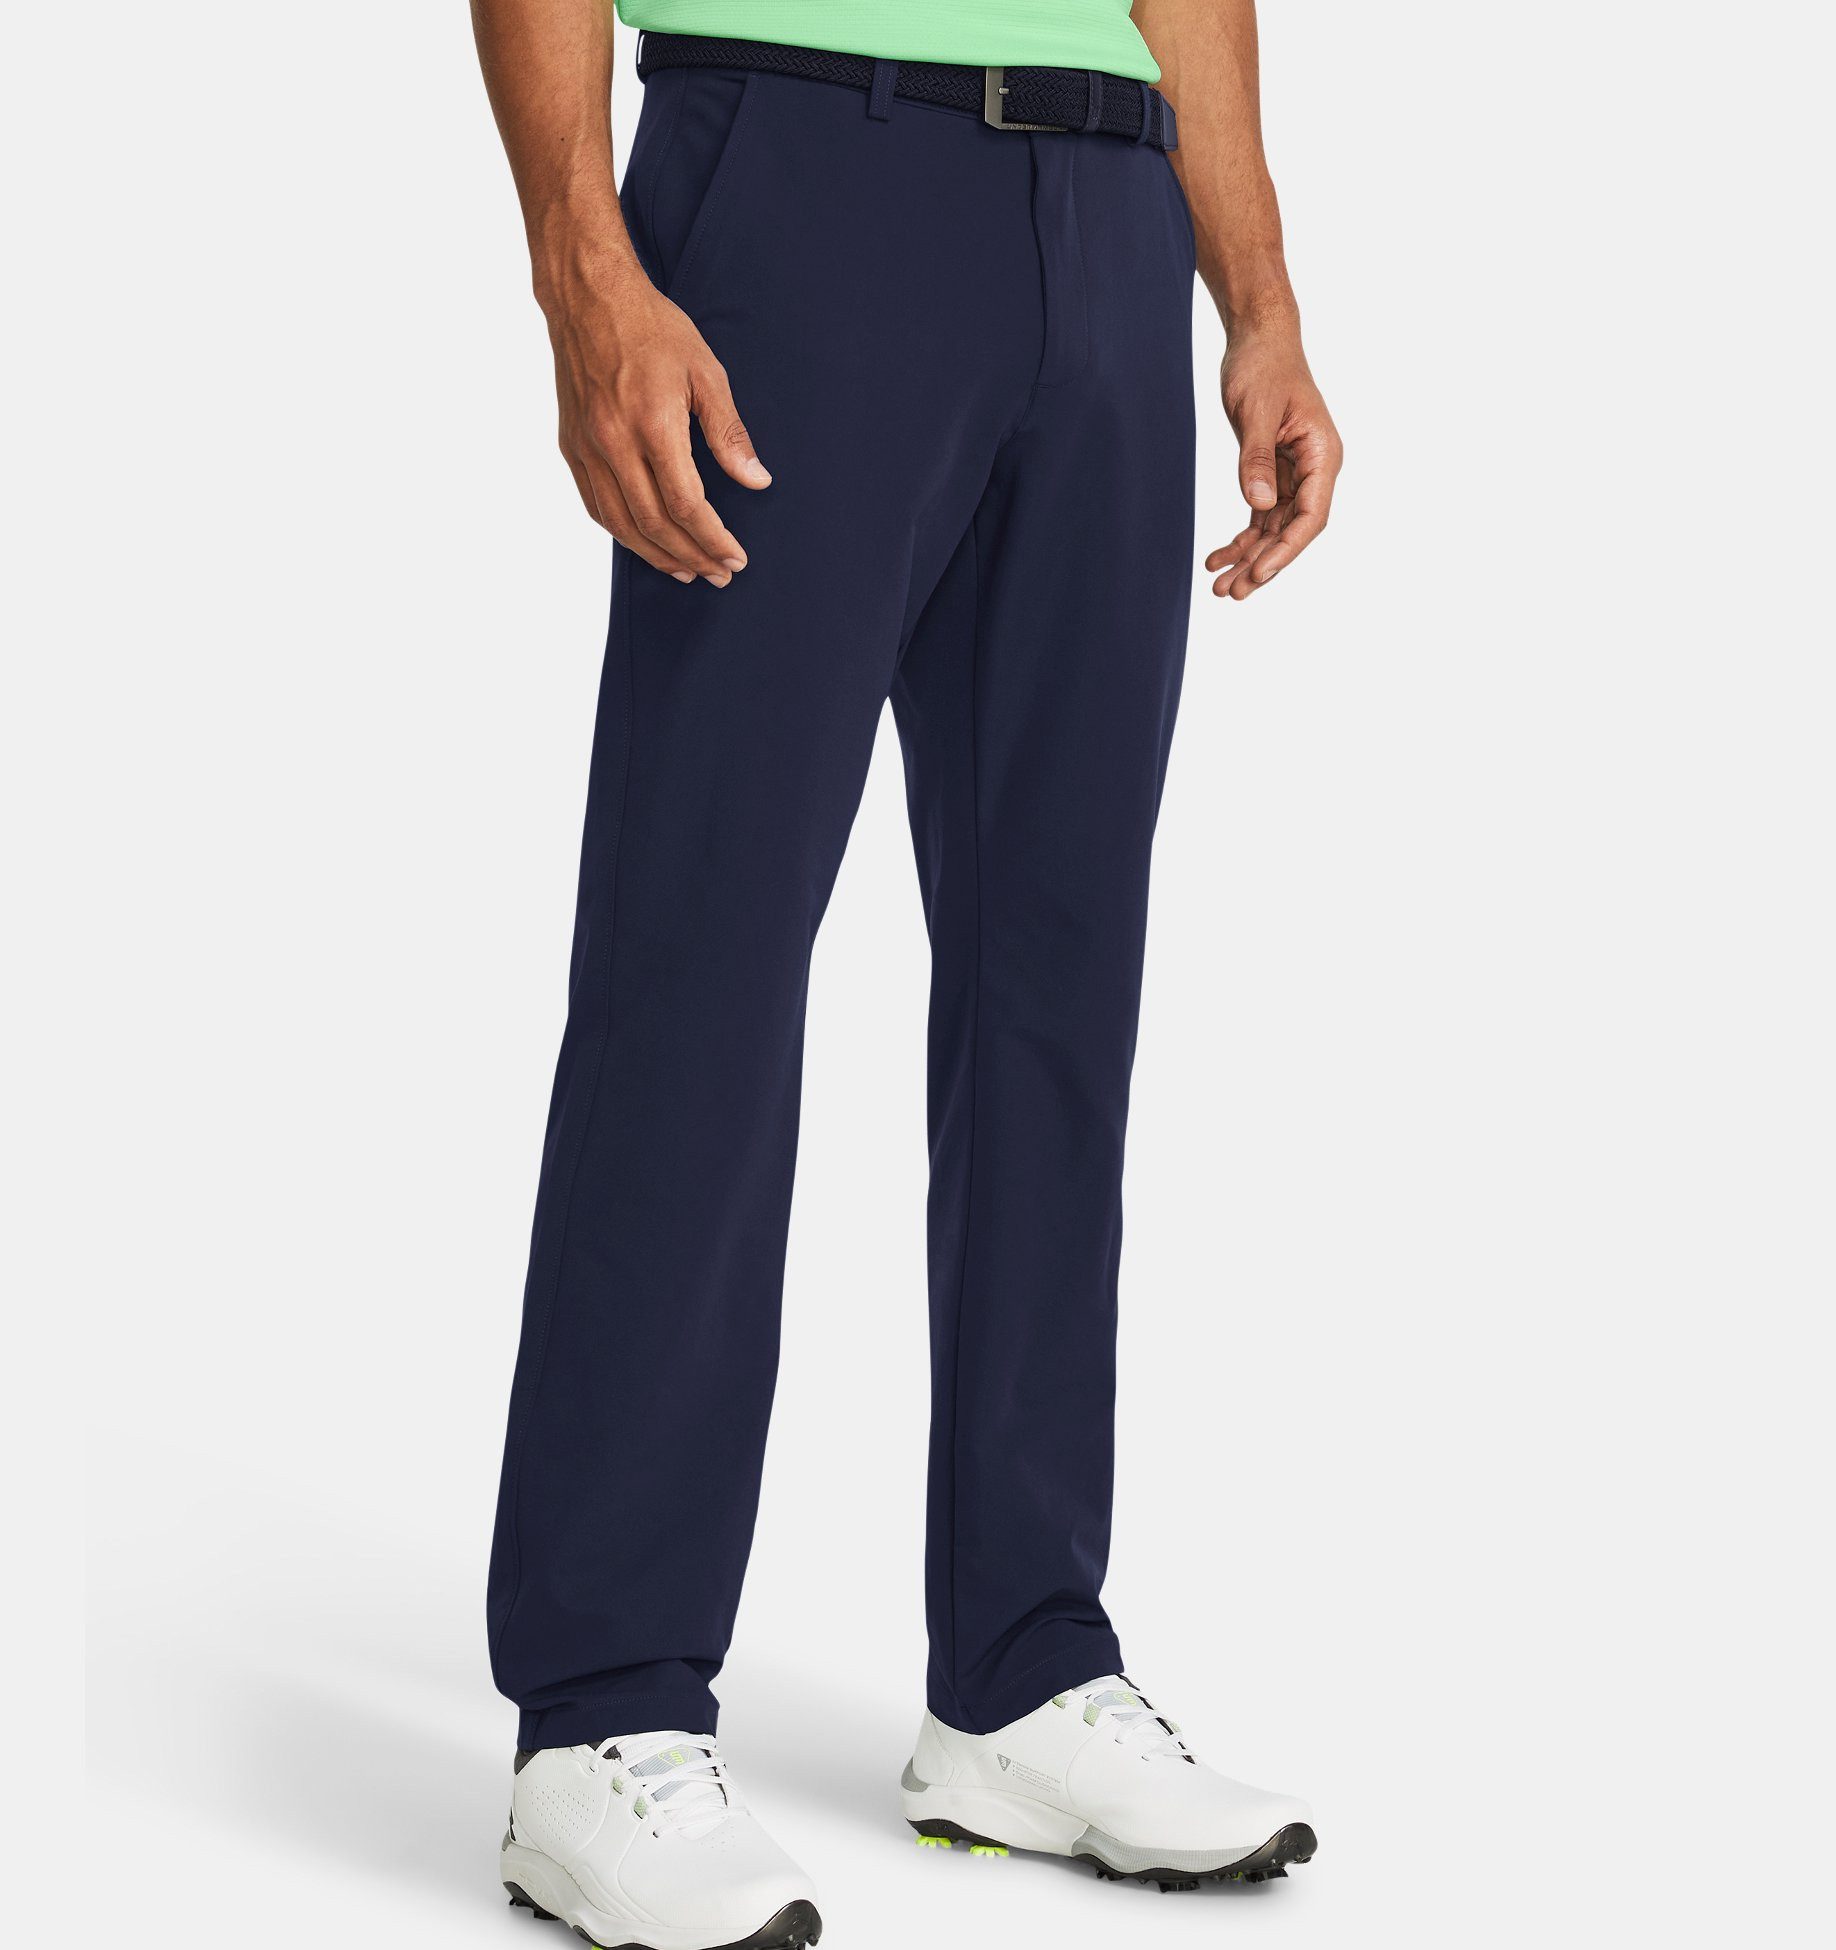 Under Armour® Golfhose UA TECH TAPERED PANT